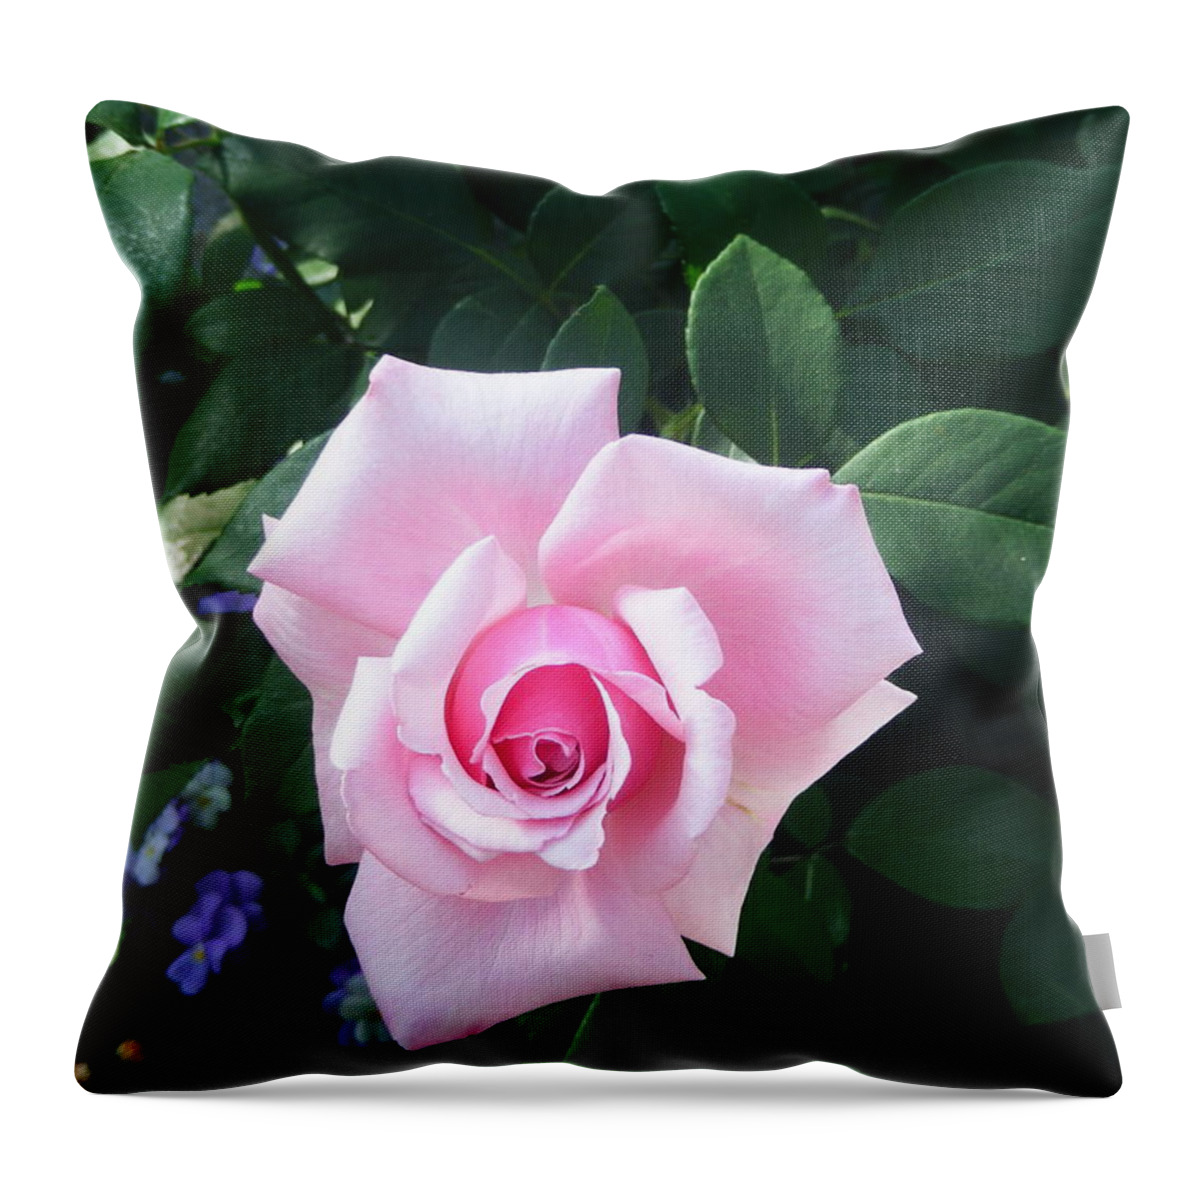 Rose Throw Pillow featuring the photograph Pink Rose by Michelle Hoffmann